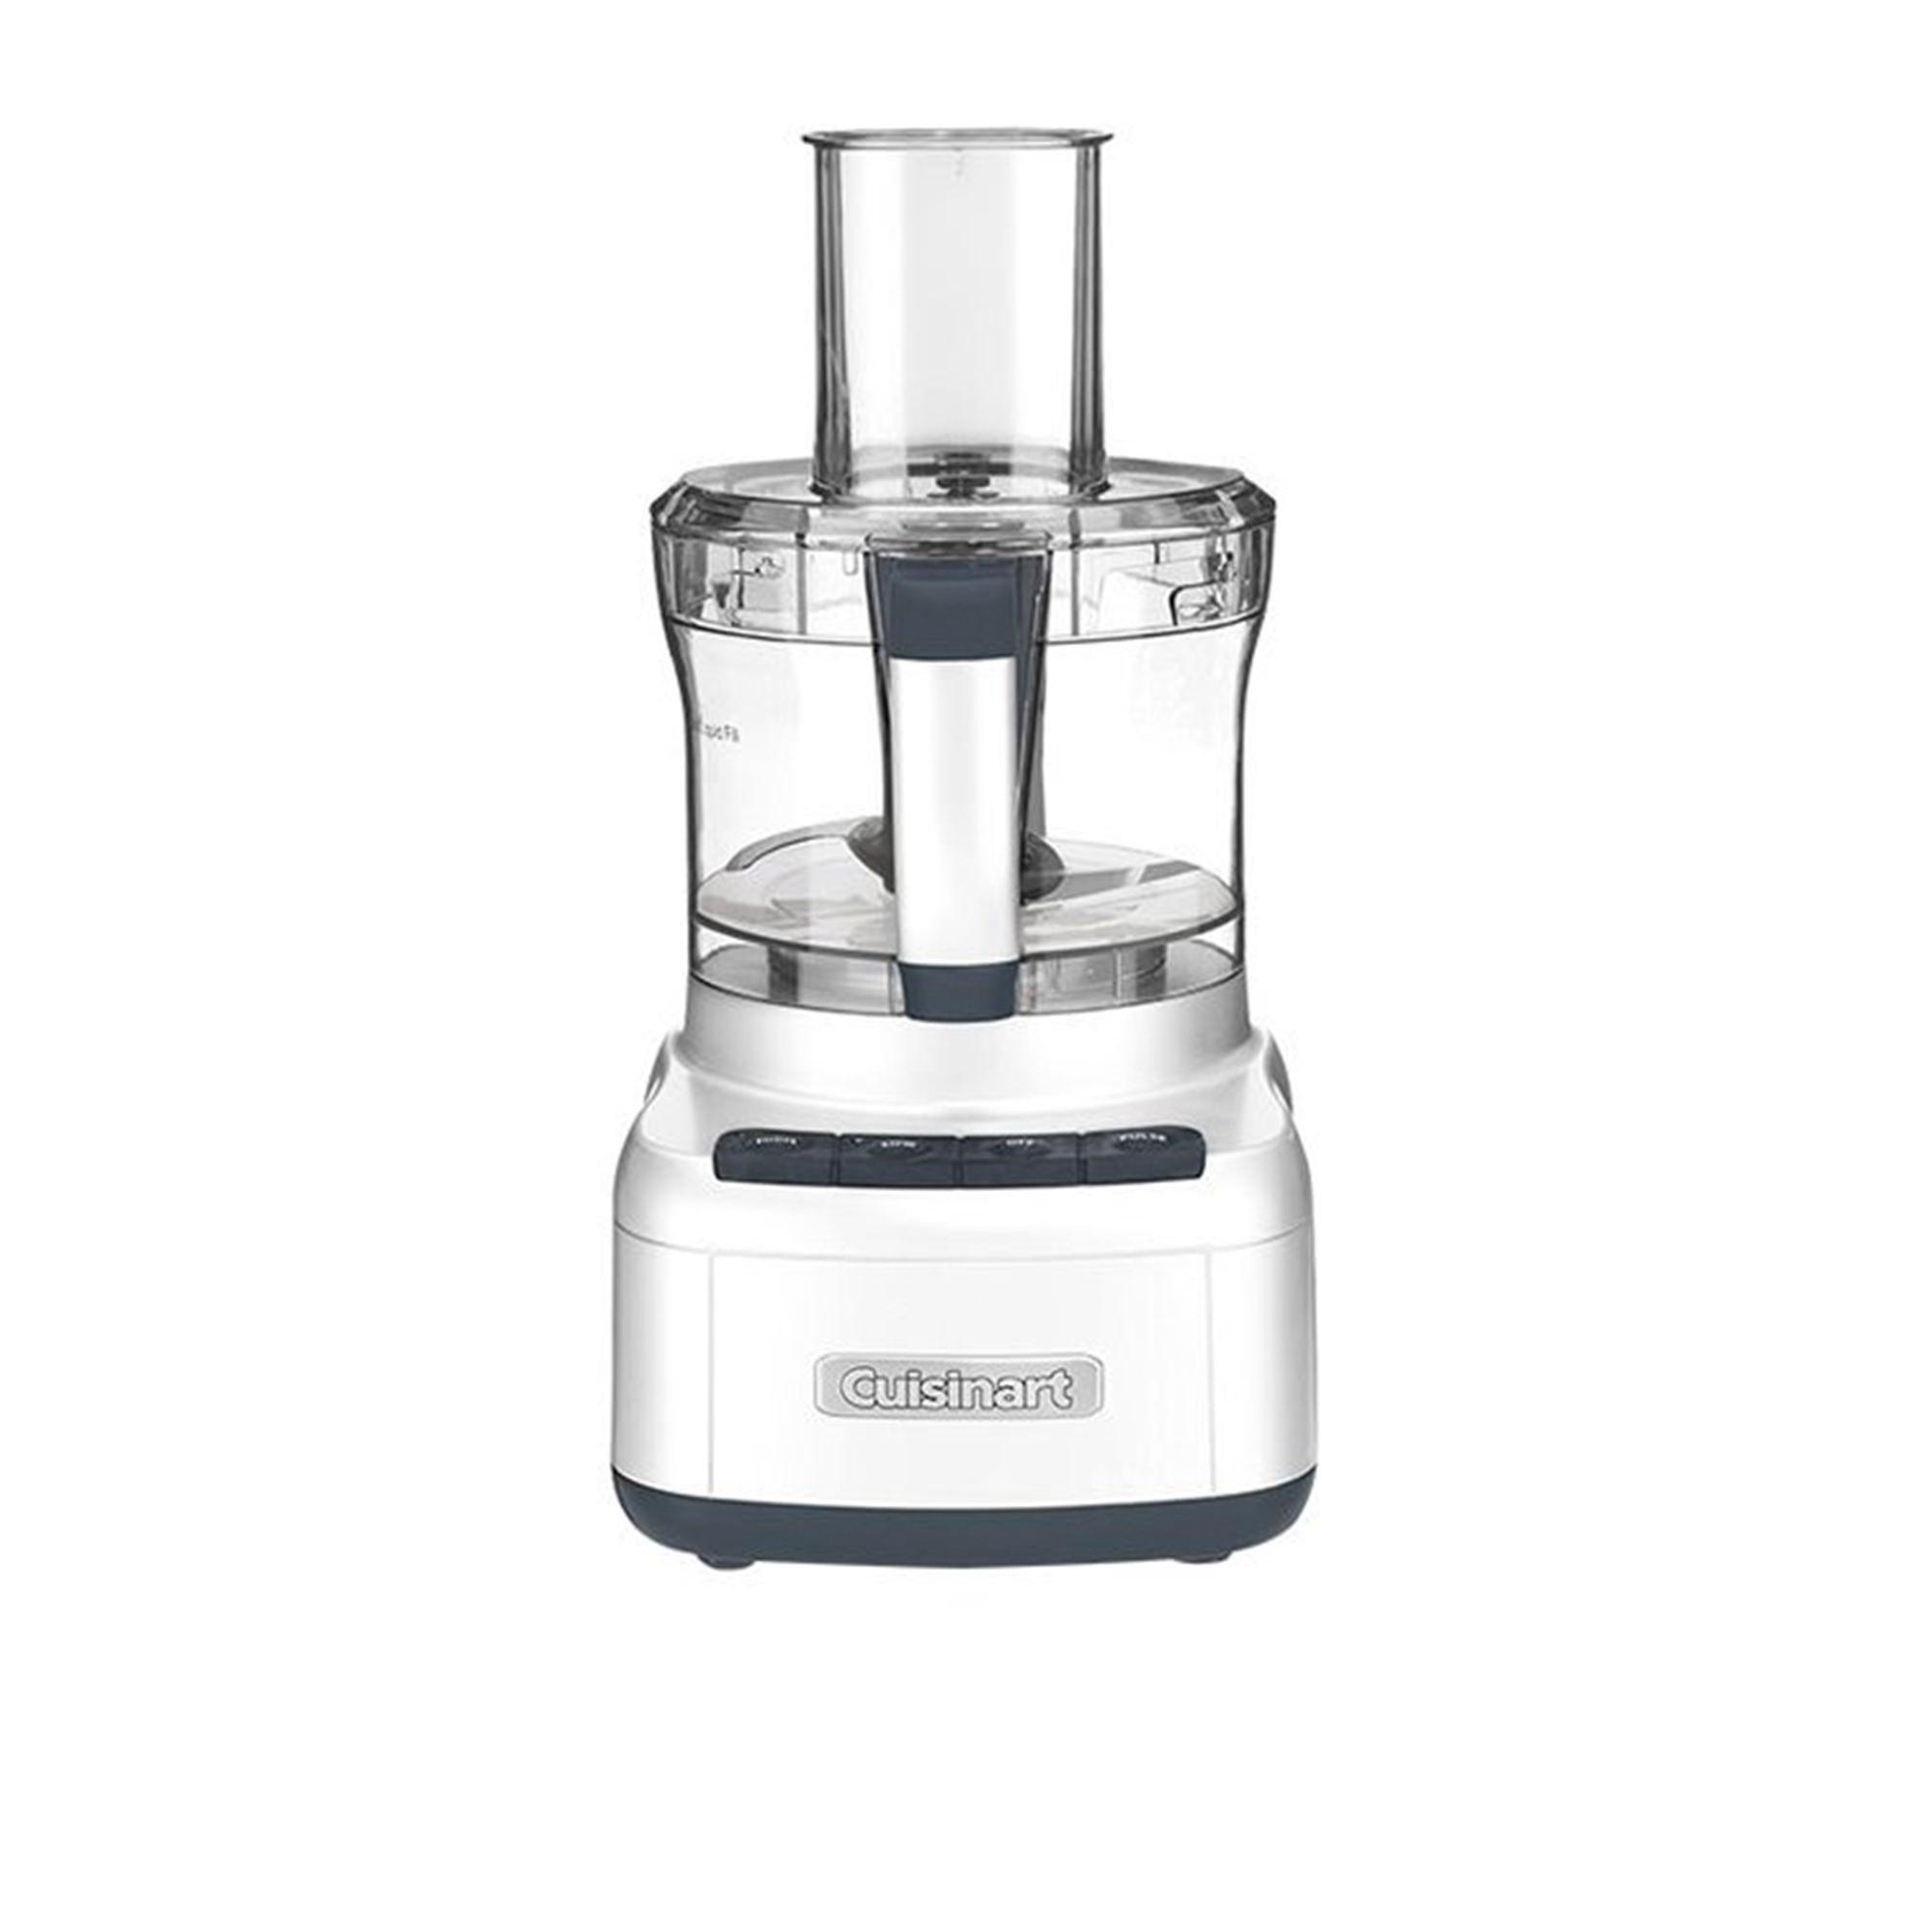 Cuisinart Food Processor 8 Cup White Image 1